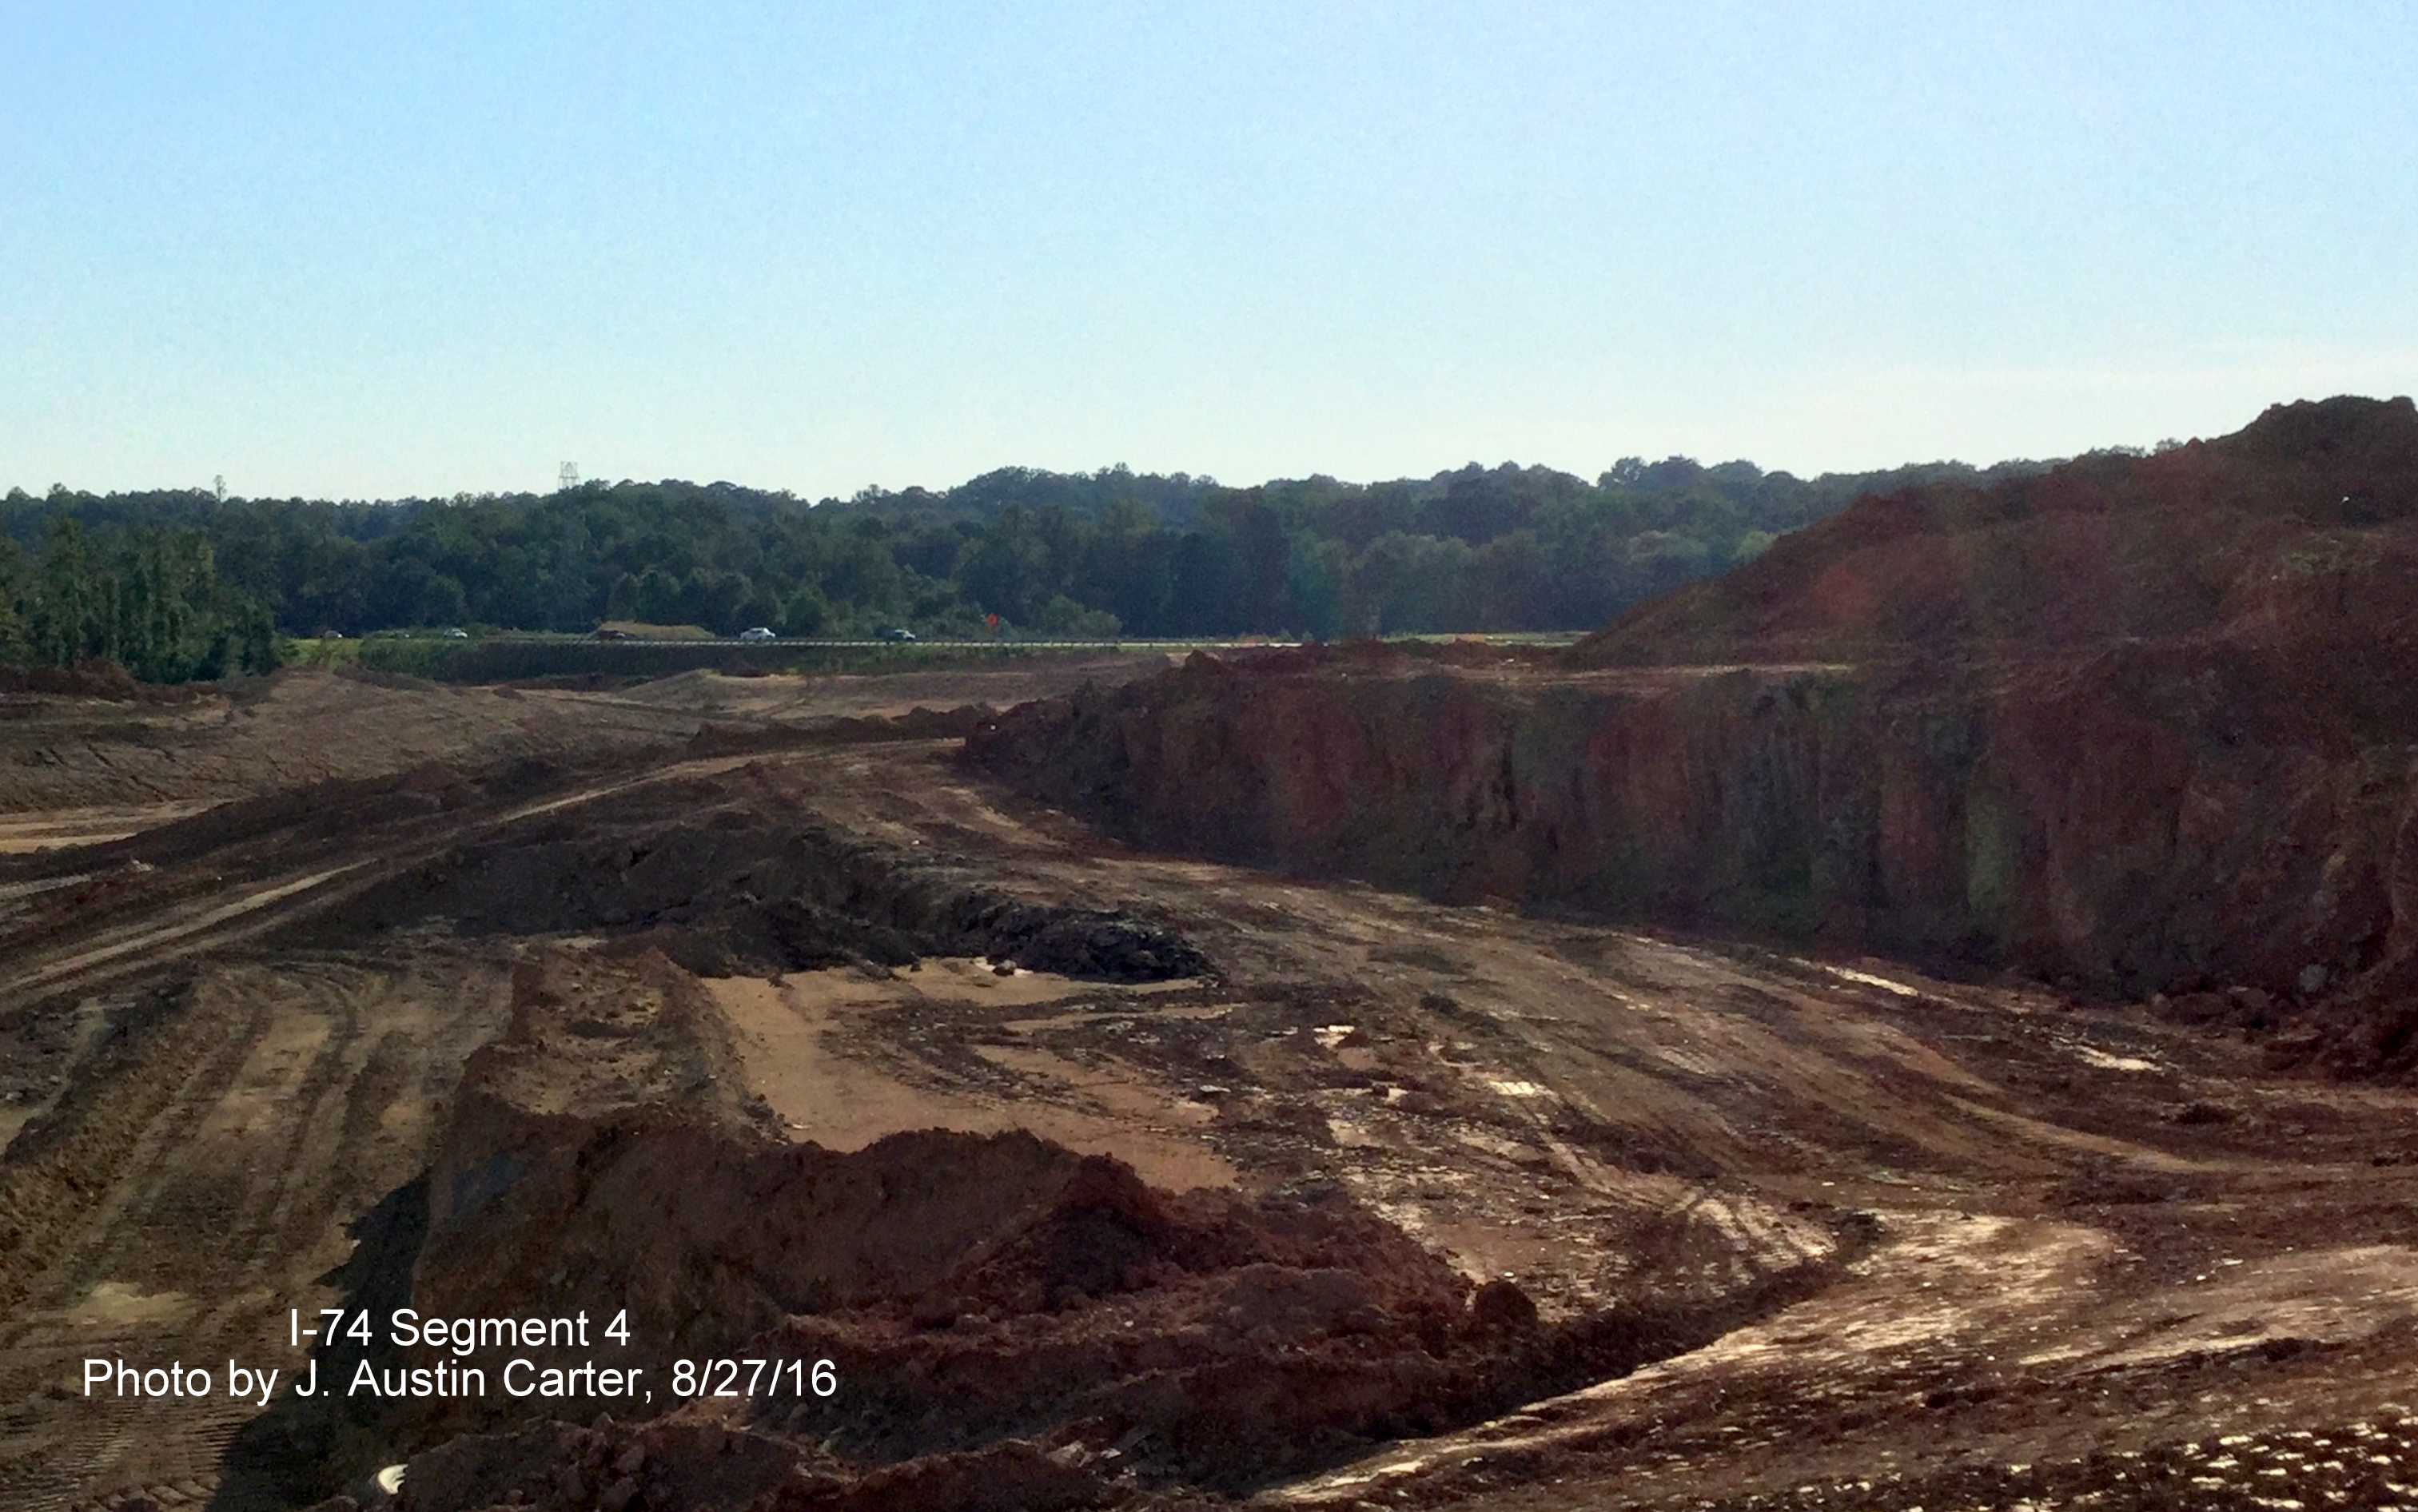 Image of clearing of land near US 158 for future interchange with Winston-Salem Northern Beltway, taken by J. Austin Carter